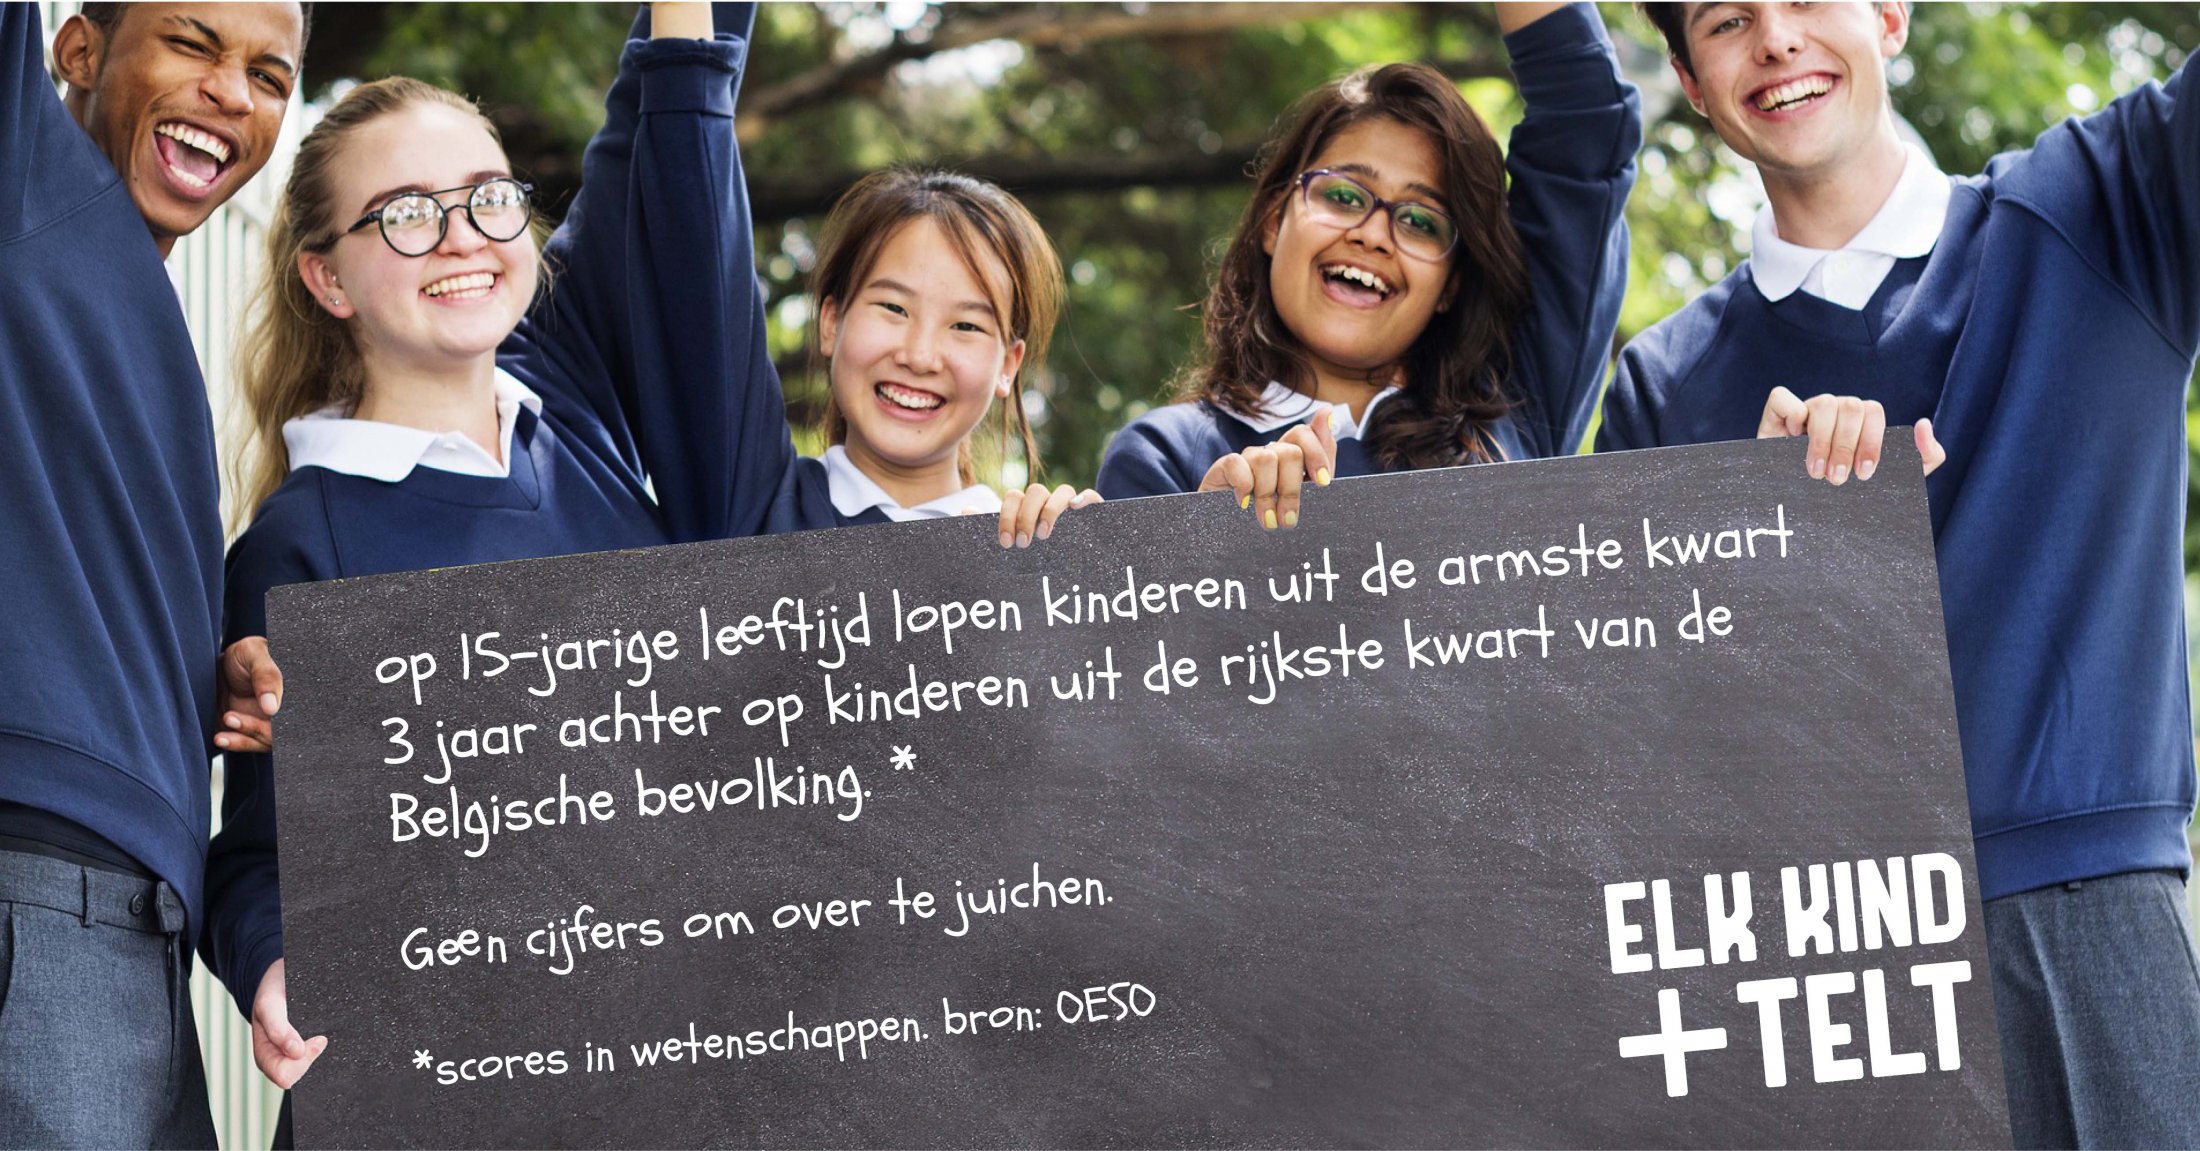 Elk Kind Telt supports the schooling of 300 disadvantaged teenagers in Antwerp.